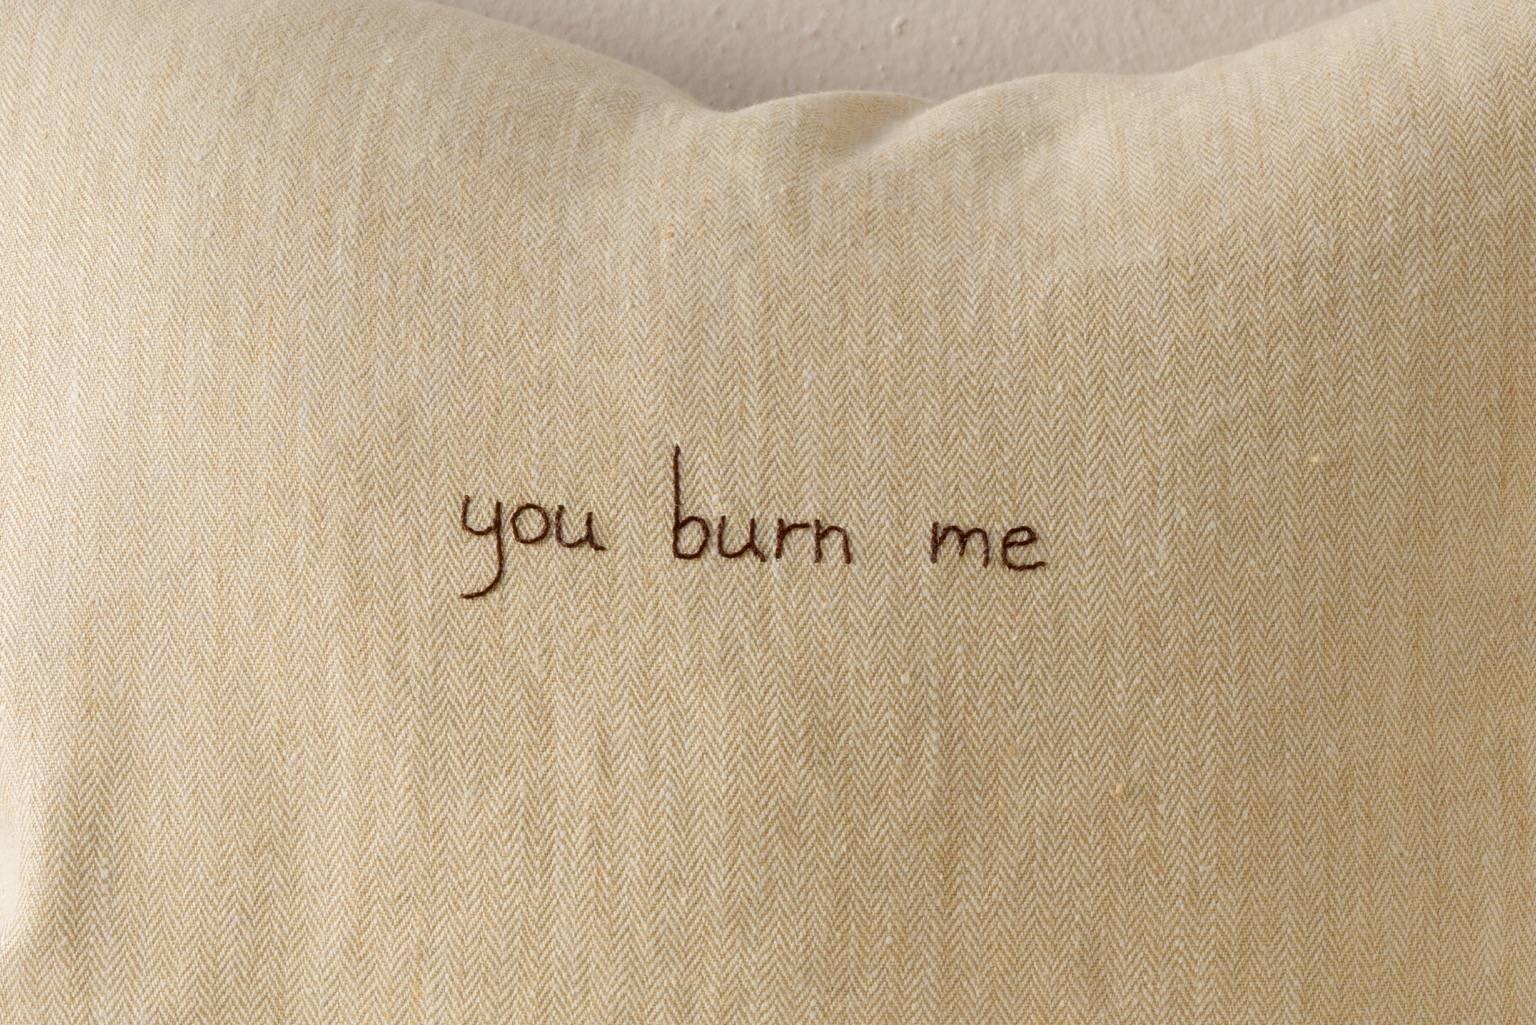 Contemporary cushion in washed soft thick cream herringbone linen with embroidered text from one of Sappho's fragments: you burn me. 

Same Linen on reverse.
75/25 goose feather and down inserts.
Concealed zippers.
Check our 1stdibs storefront